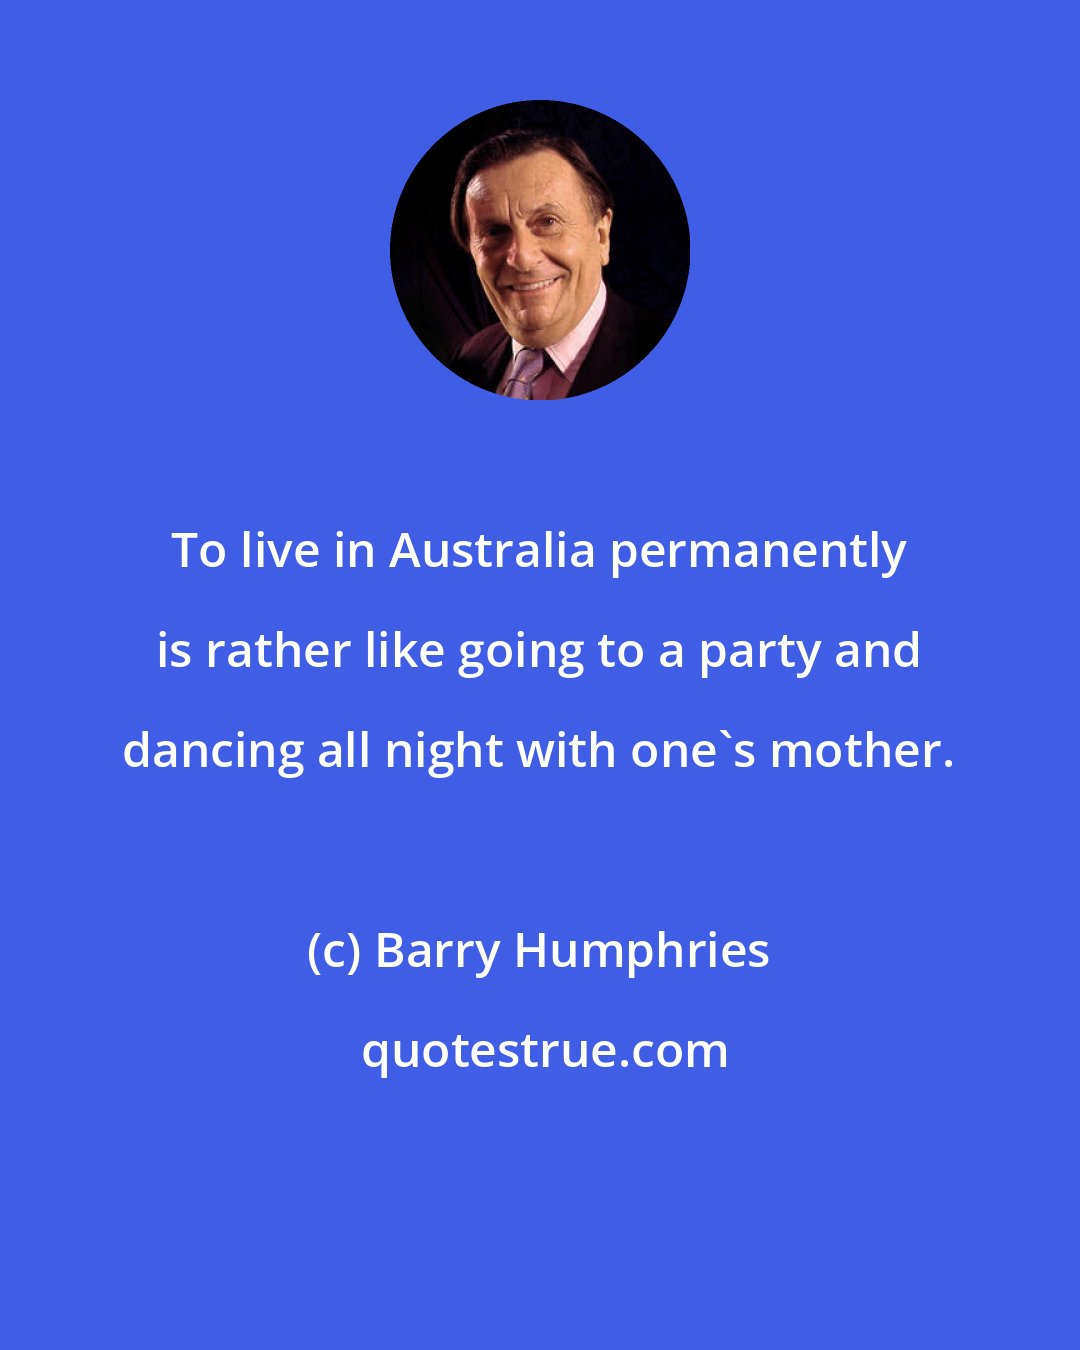 Barry Humphries: To live in Australia permanently is rather like going to a party and dancing all night with one's mother.